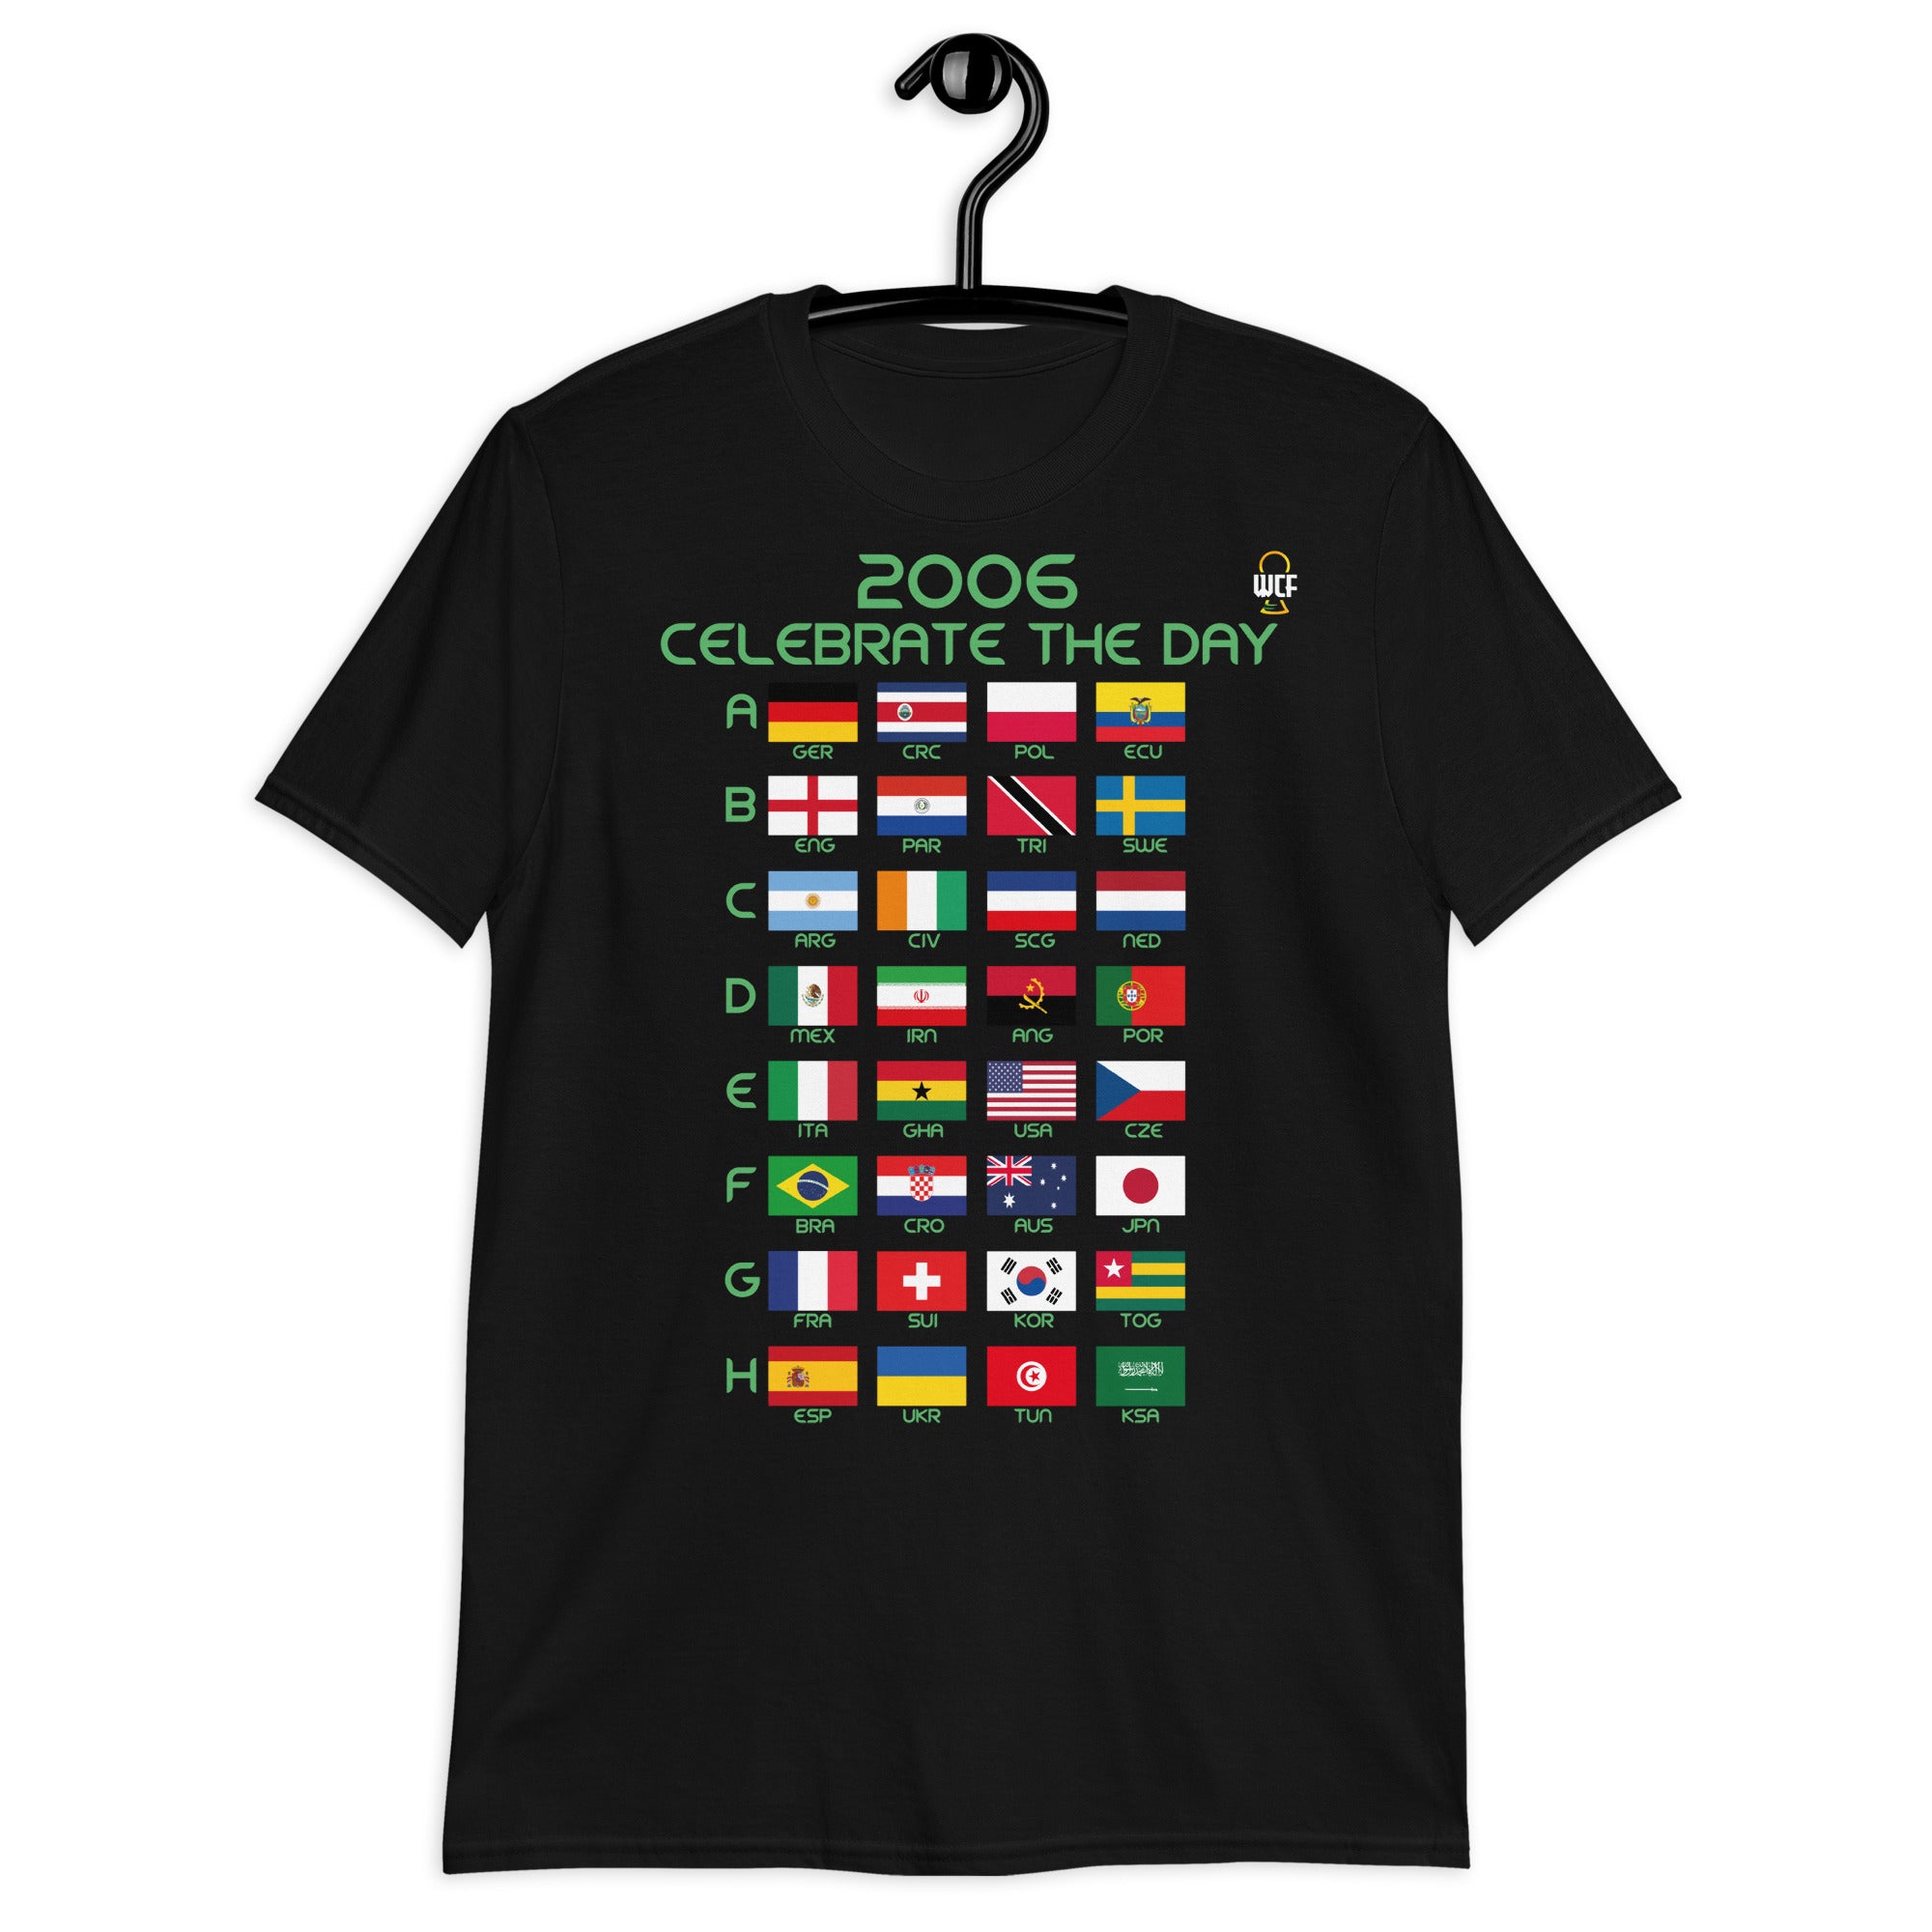 FIFA World Cup Germany 2006 Softstyle T-Shirt - CELEBRATE THE DAY